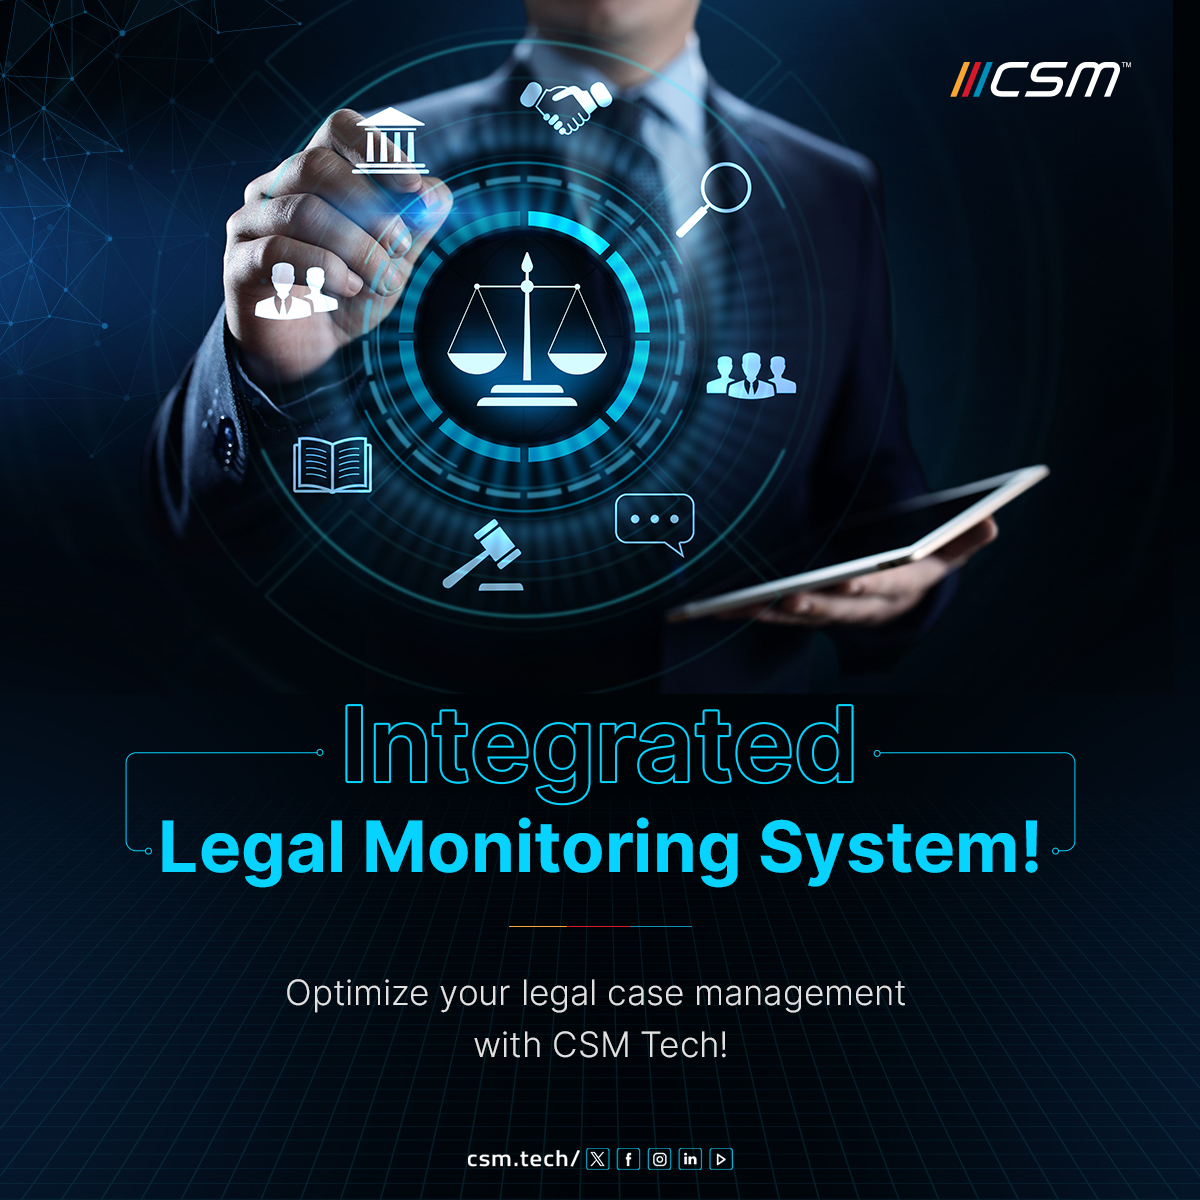 Track Your Case, Monitor Progress with CSM Tech's Integrated Legal Monitoring System! Experience optimized case management that ensures accountability, compliance, and timely resolutions. 👉 Learn More: bit.ly/CSM-ILMS #CSMTech #LegalMonitoringSystem